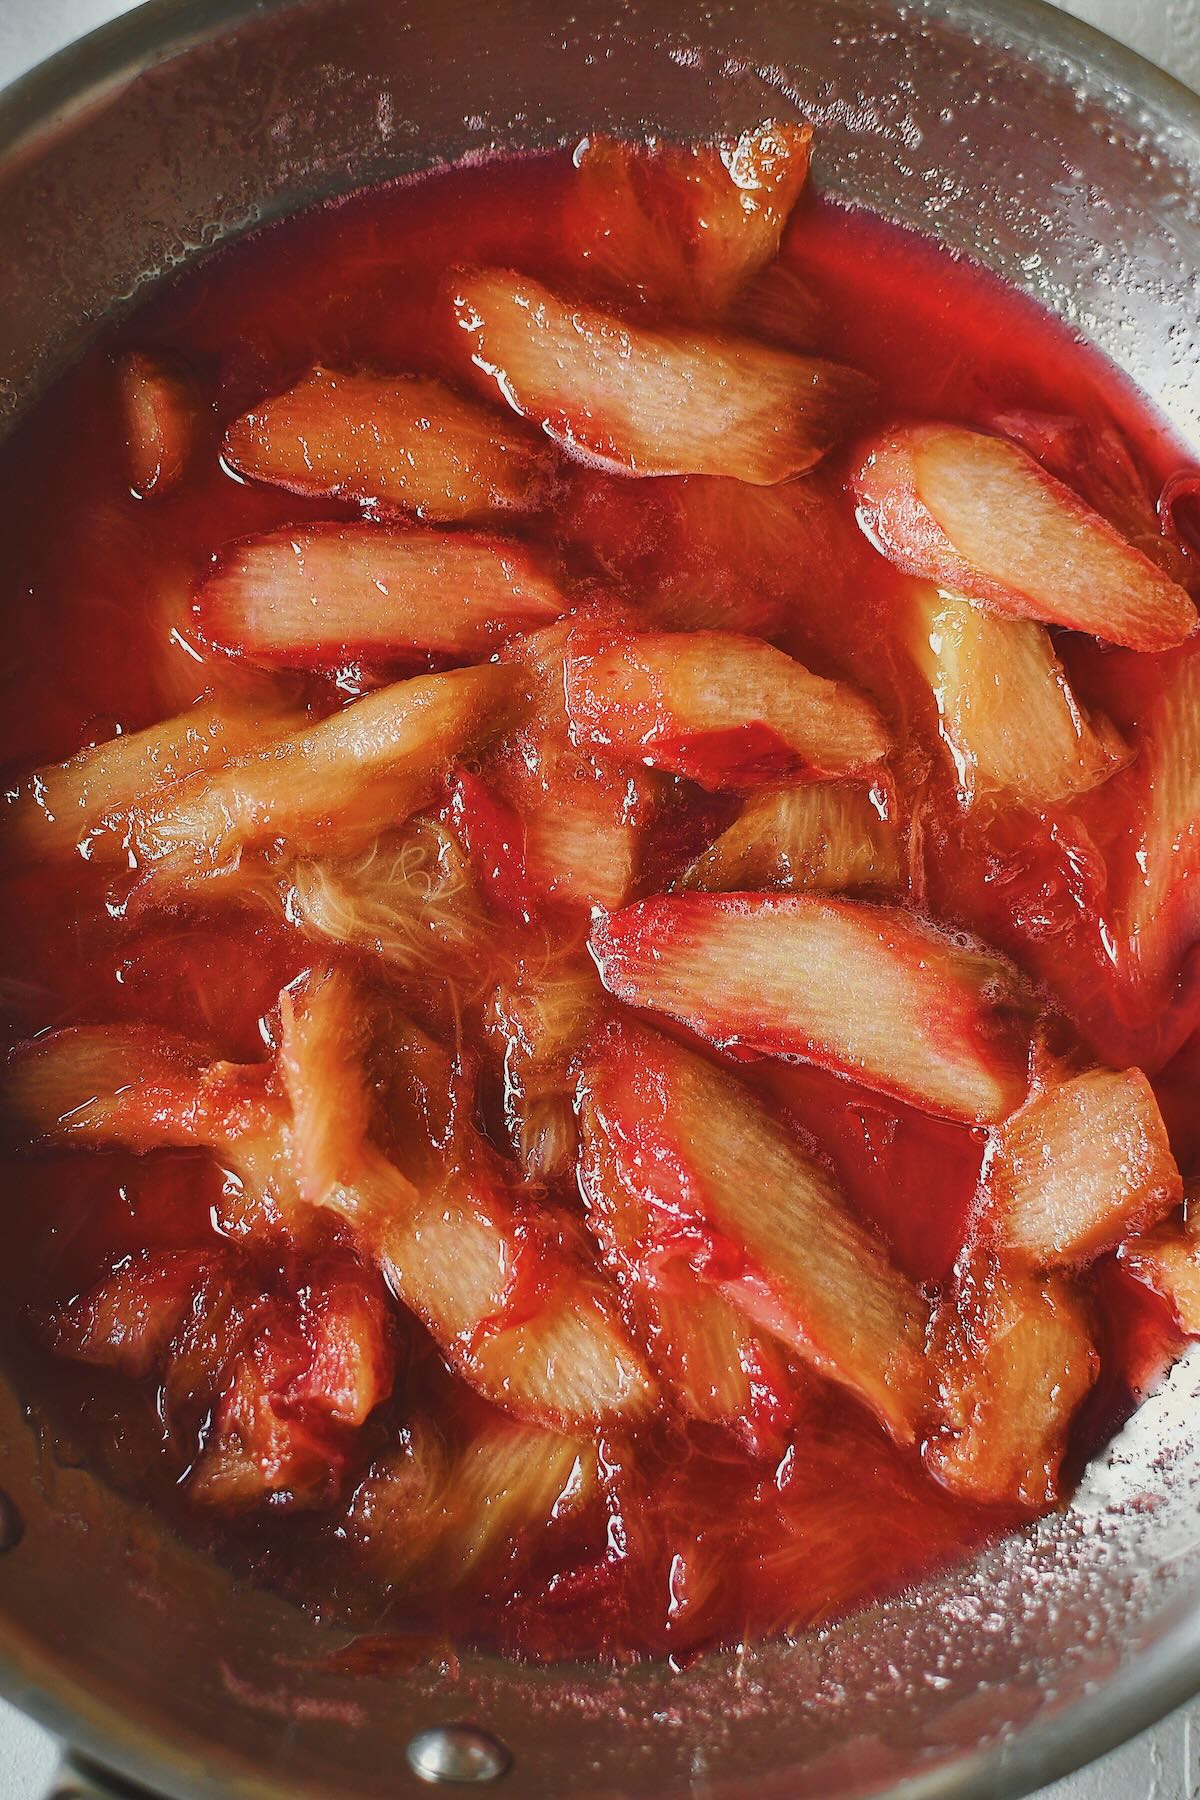 Rhubarb cooking in a skillet with lemon juice and sugar just till the sugar dissolved.